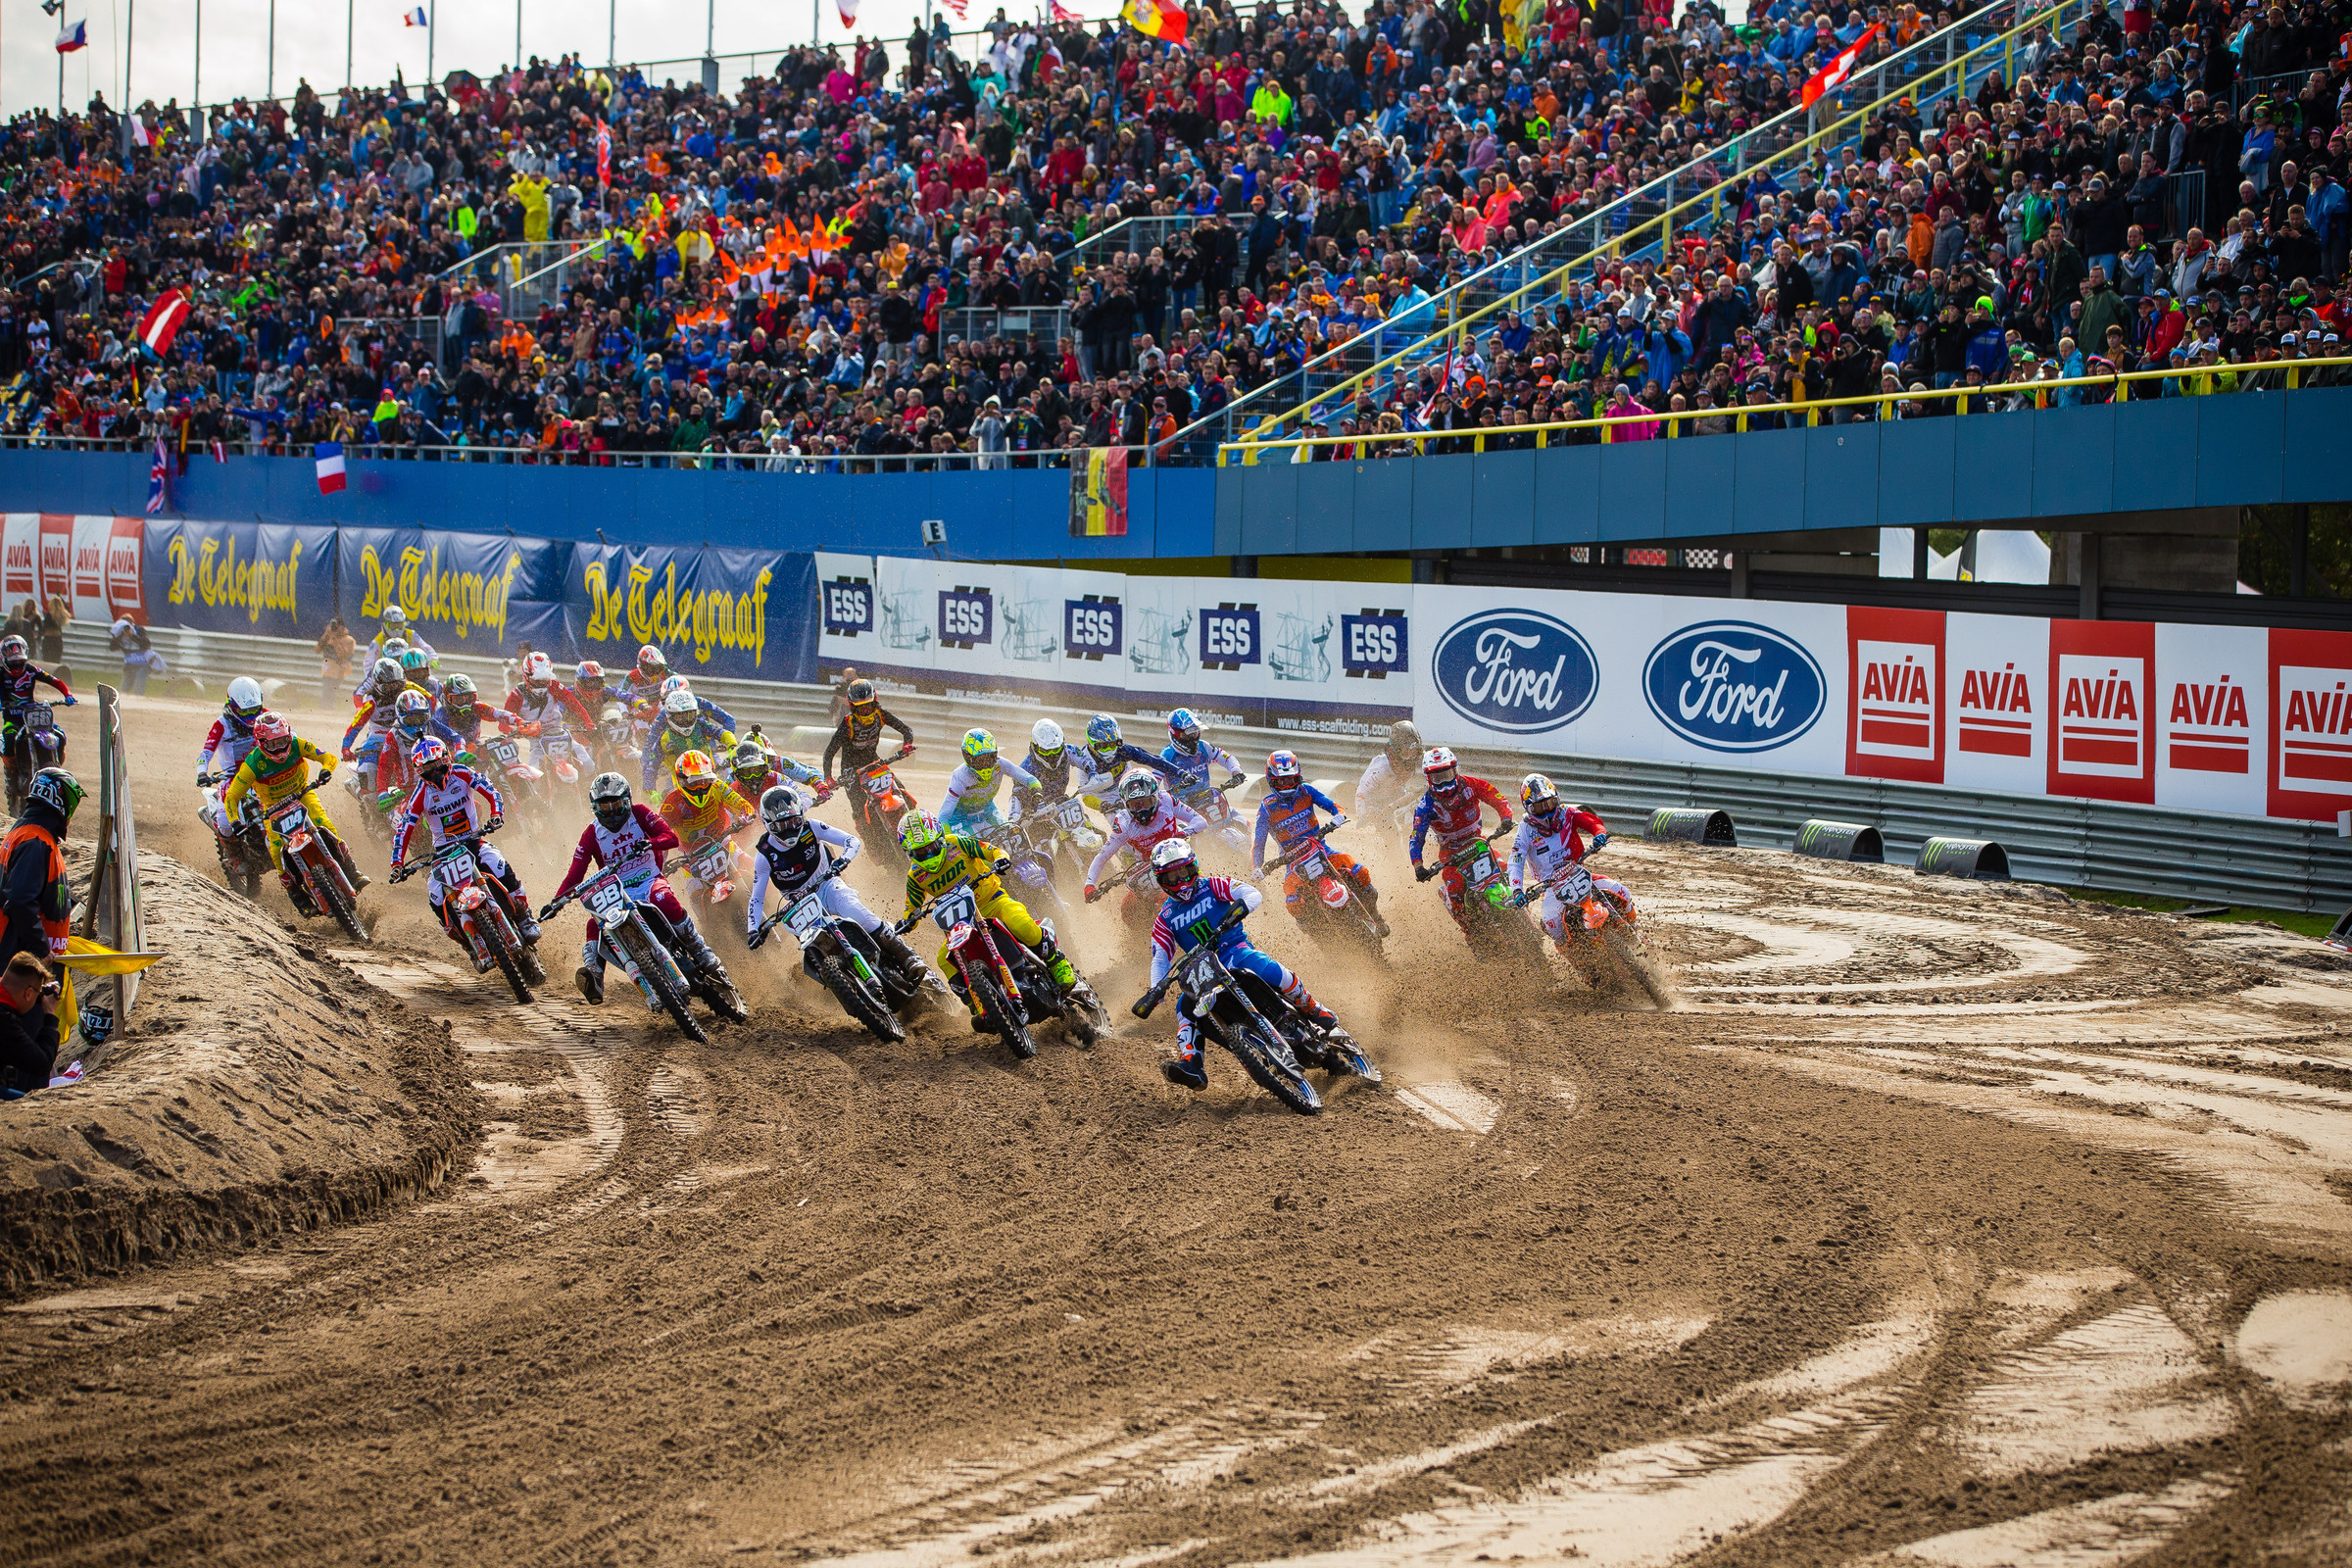 2020 FIM Motocross of Nations Cancelled Due to COVID-19